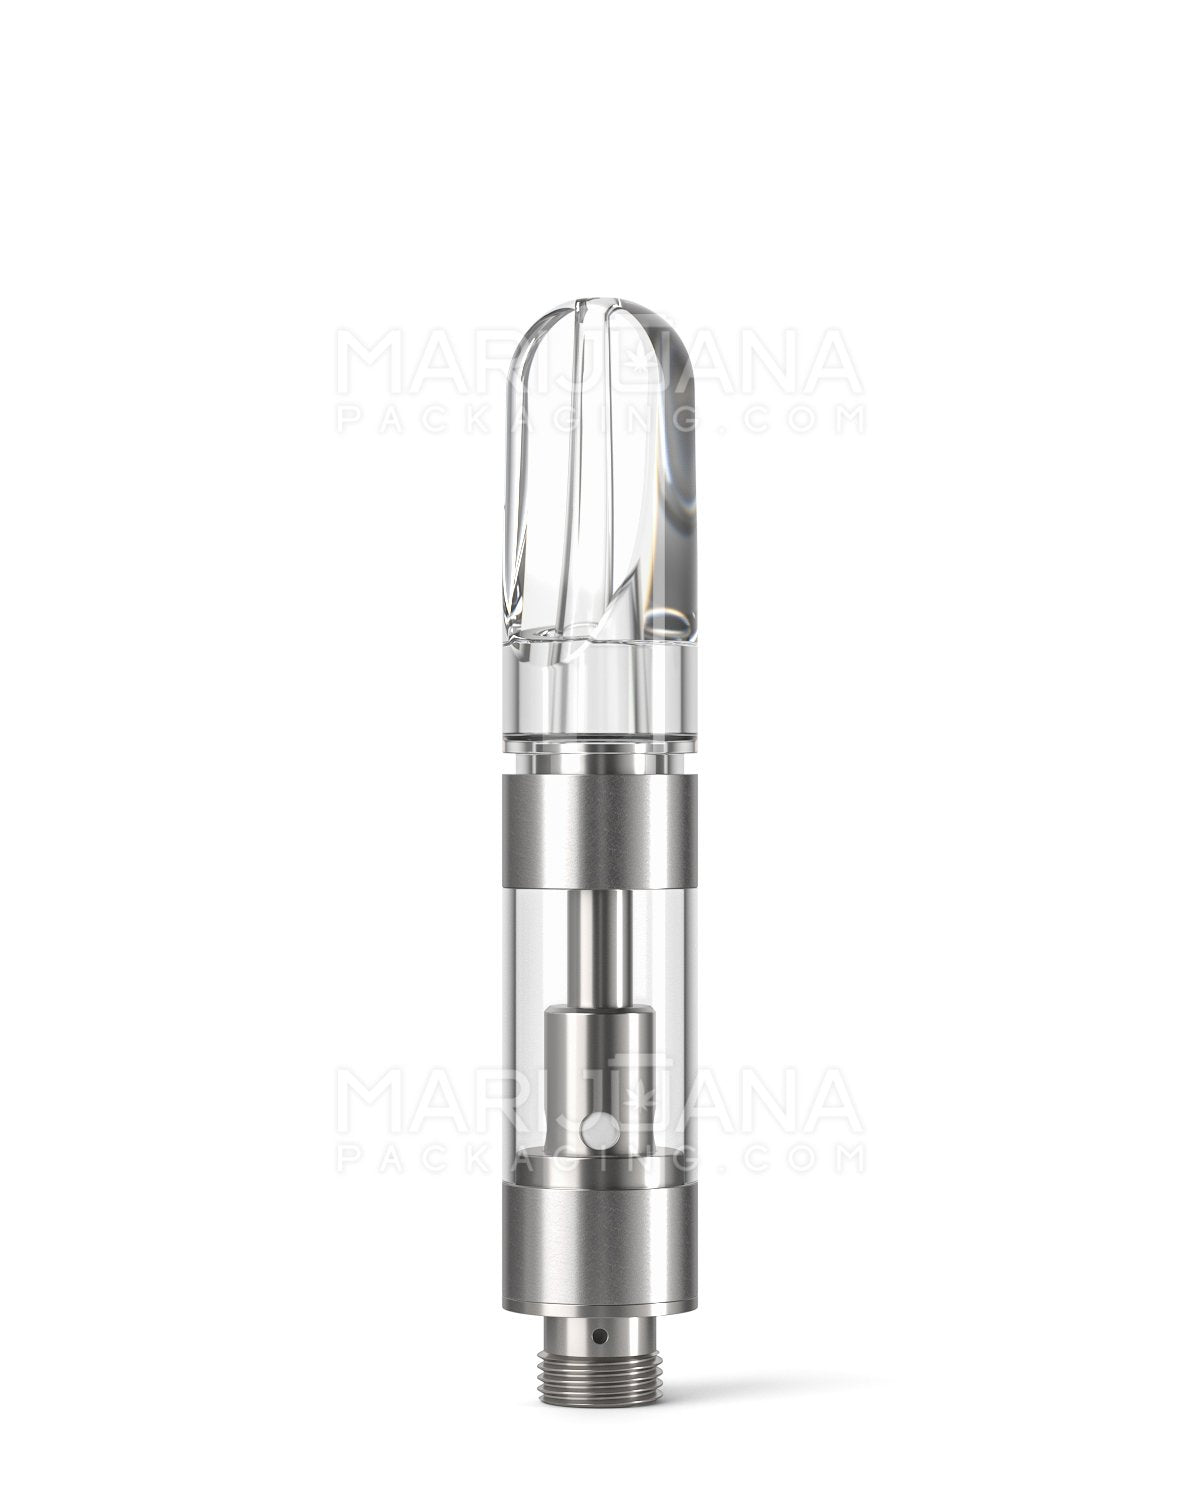 CCELL | Liquid6 Reactor Plastic Cartridge with Clear Plastic Mouthpiece | 0.5mL - Press On | Sample - 1